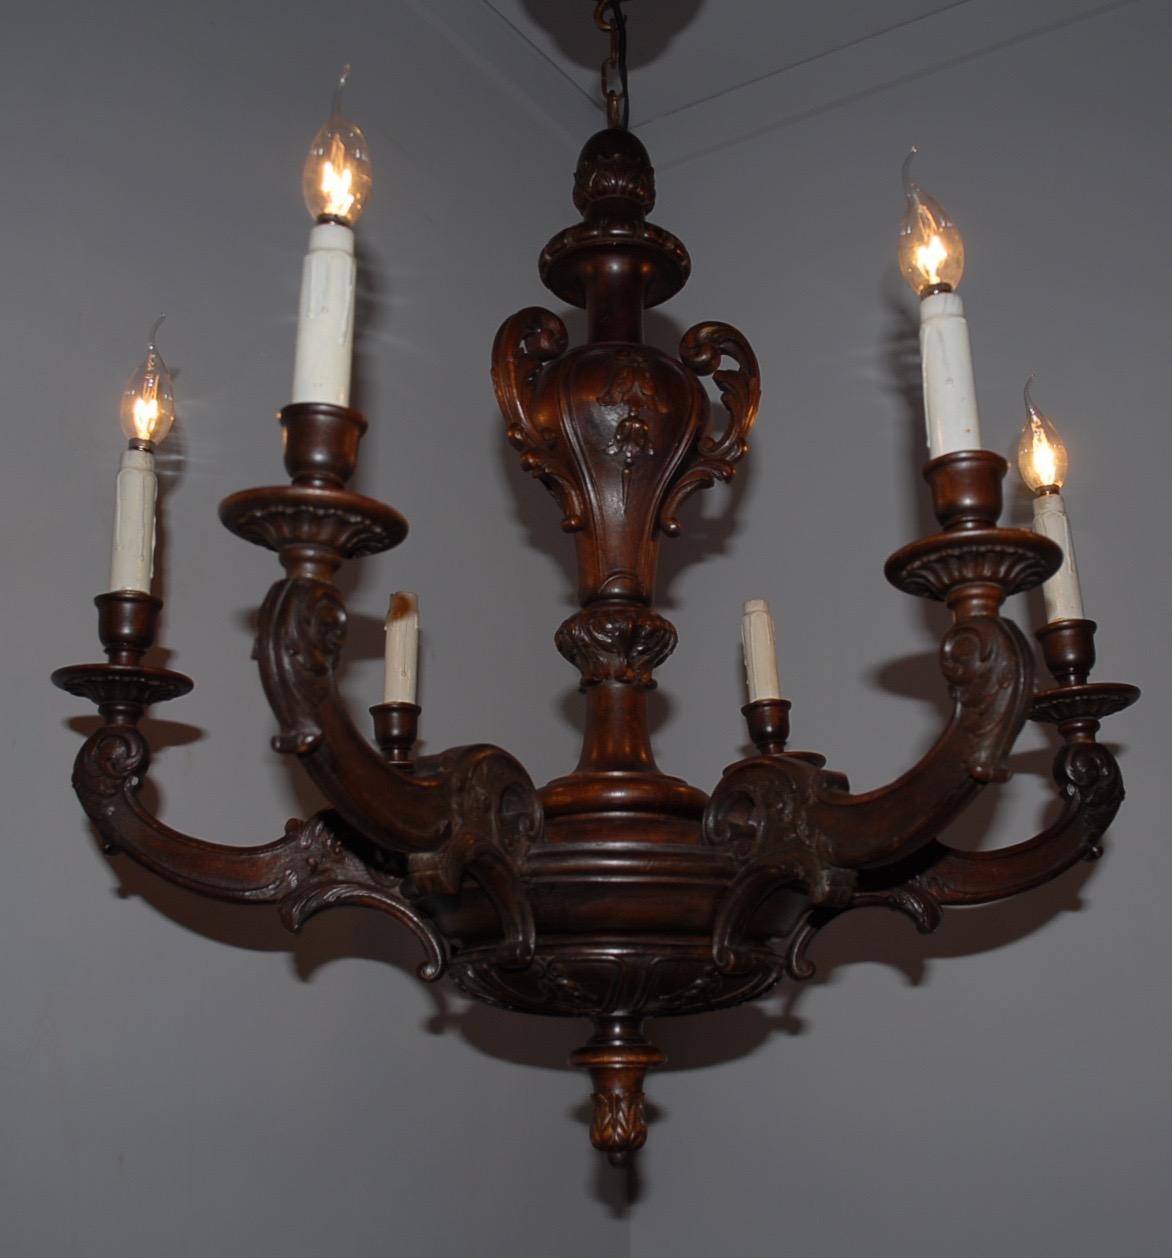 Speaking of hand carved masterpieces.

This six-light, early 20th century Italian chandelier is another one of our recent great finds and it is in excellent condition. The superb hand-carved details reveal the quality of the workmanship and it is